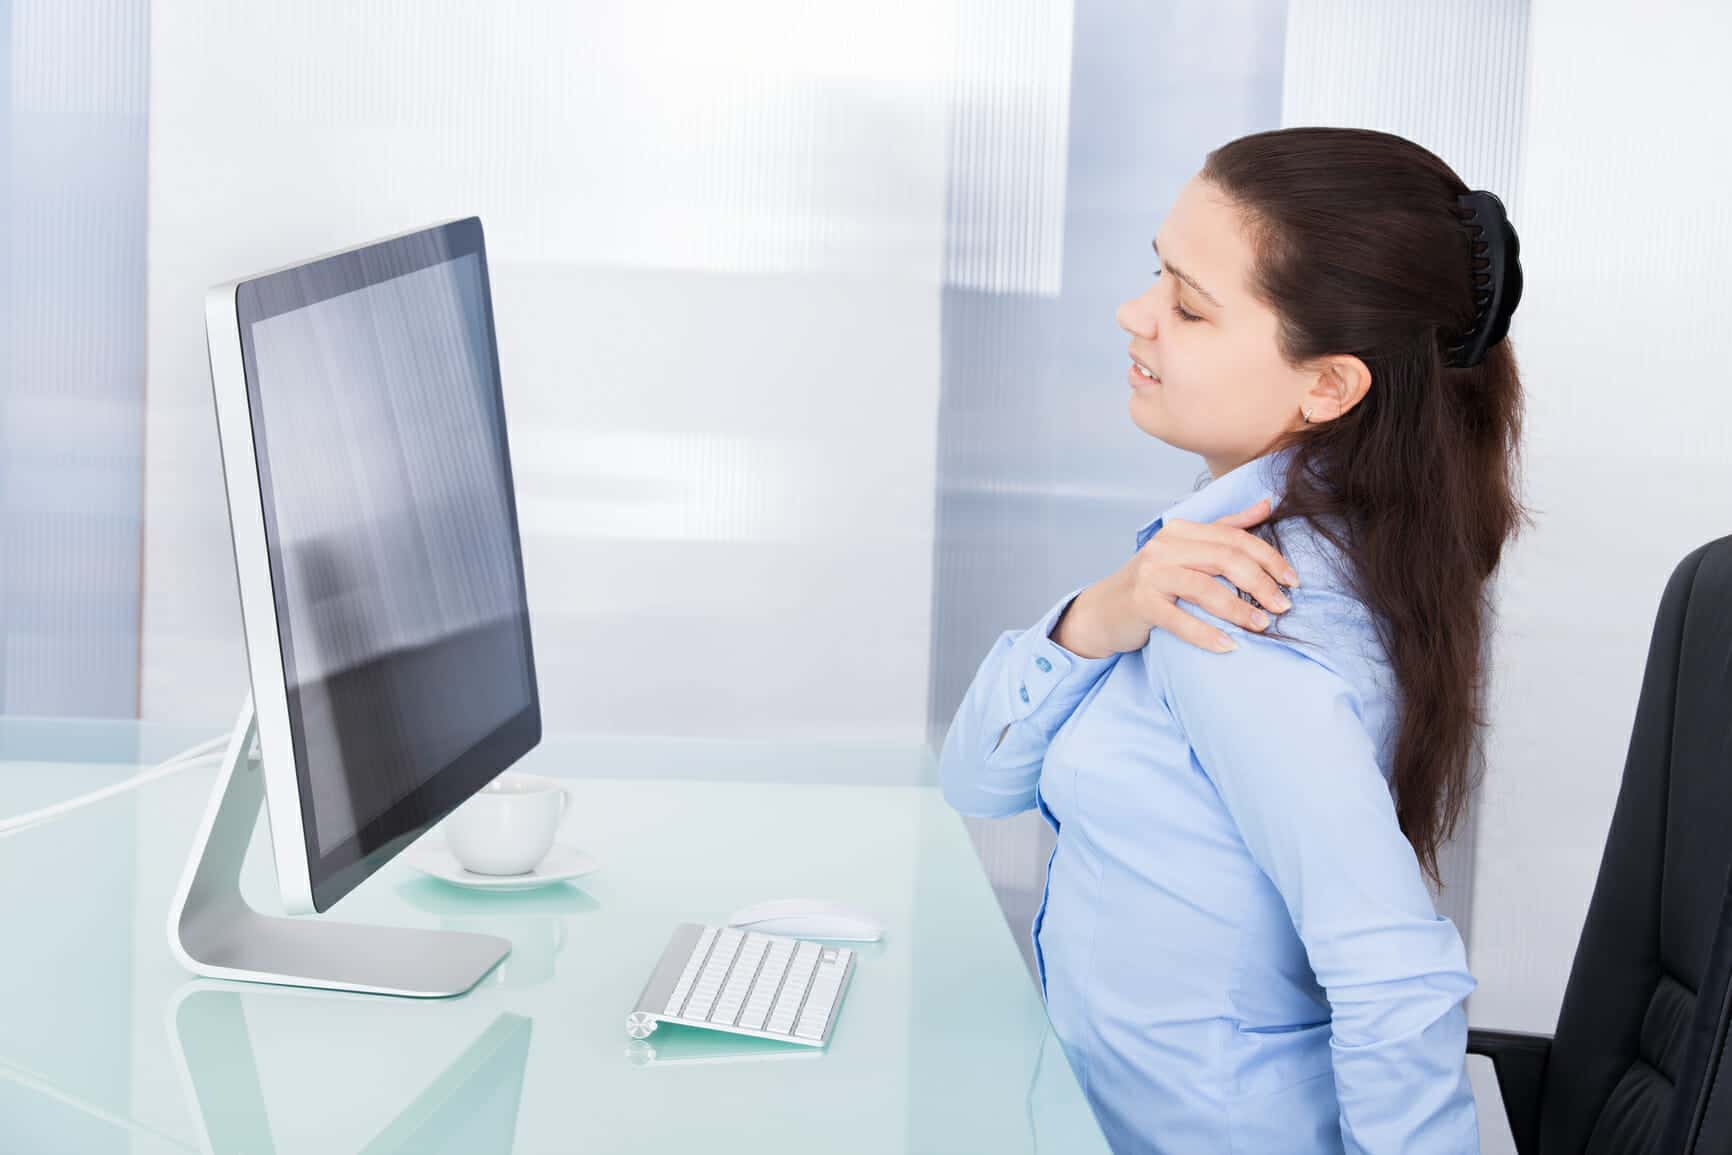 Benefits of Improving Your Posture